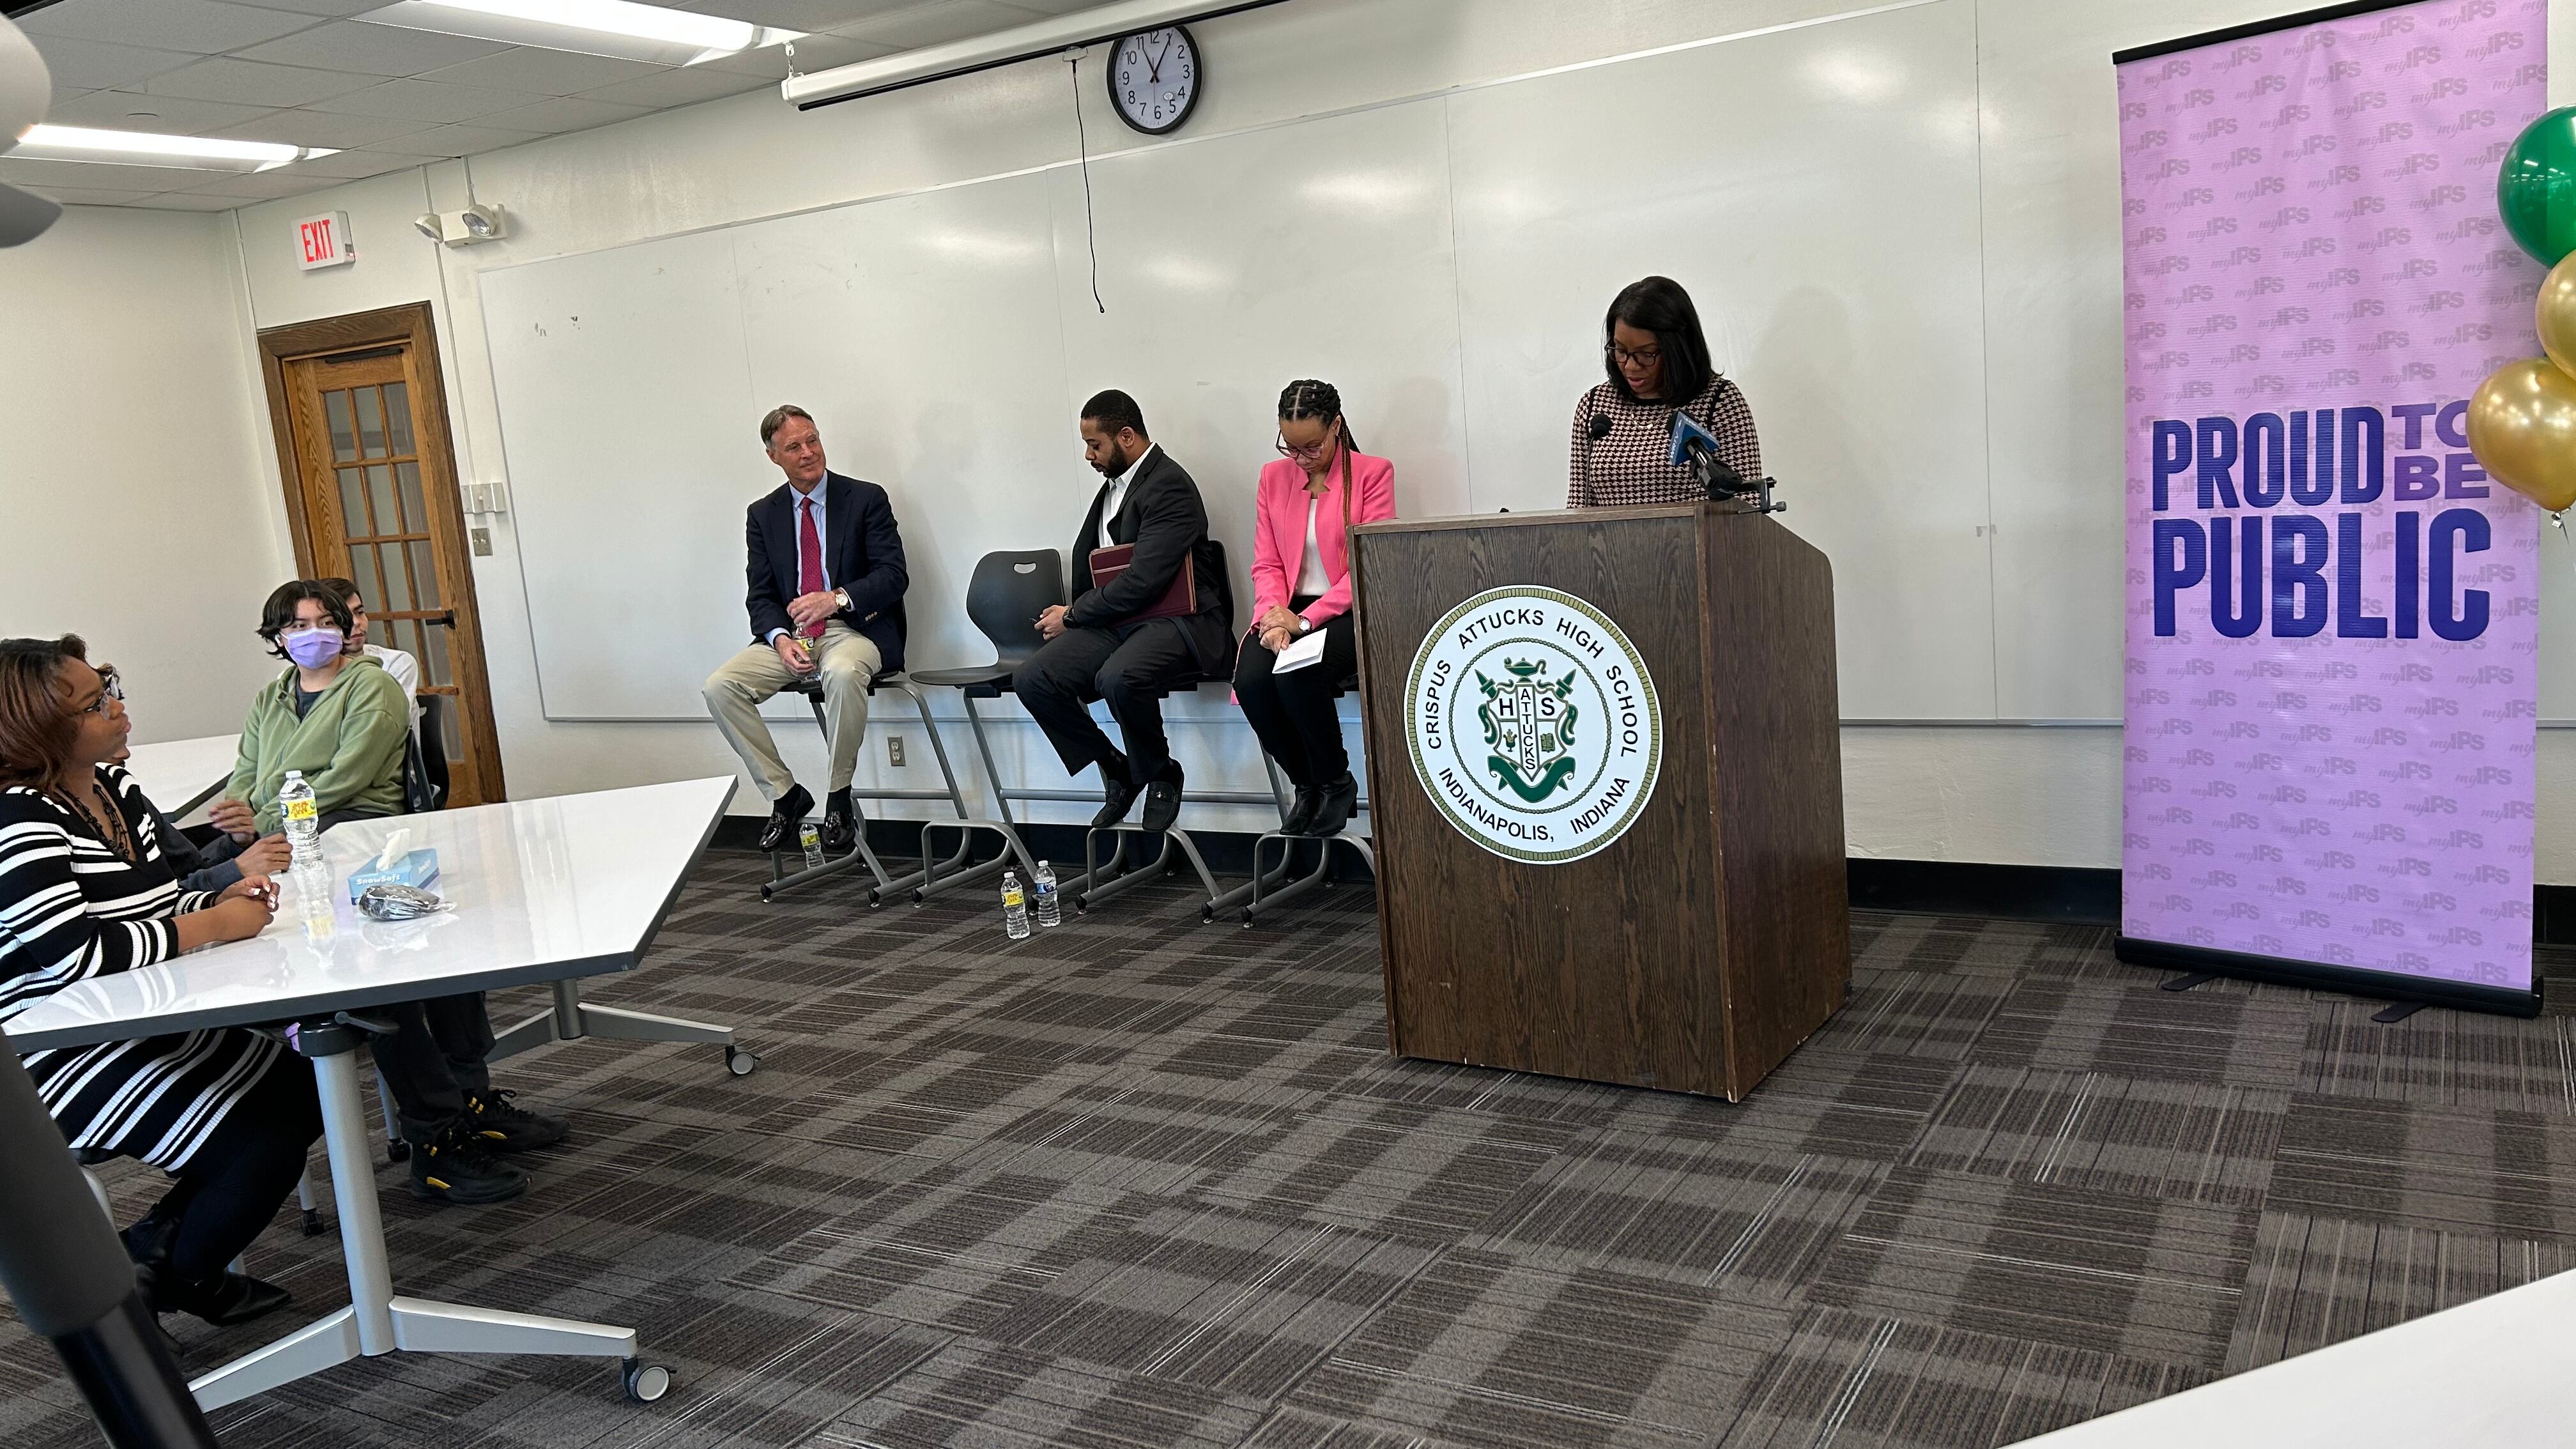 A woman stands speaking behind a podium that reads “Crispus Attucks High School.” On the left are three people sitting down facing an audience. On the right is a banner that says “Proud to be public.”